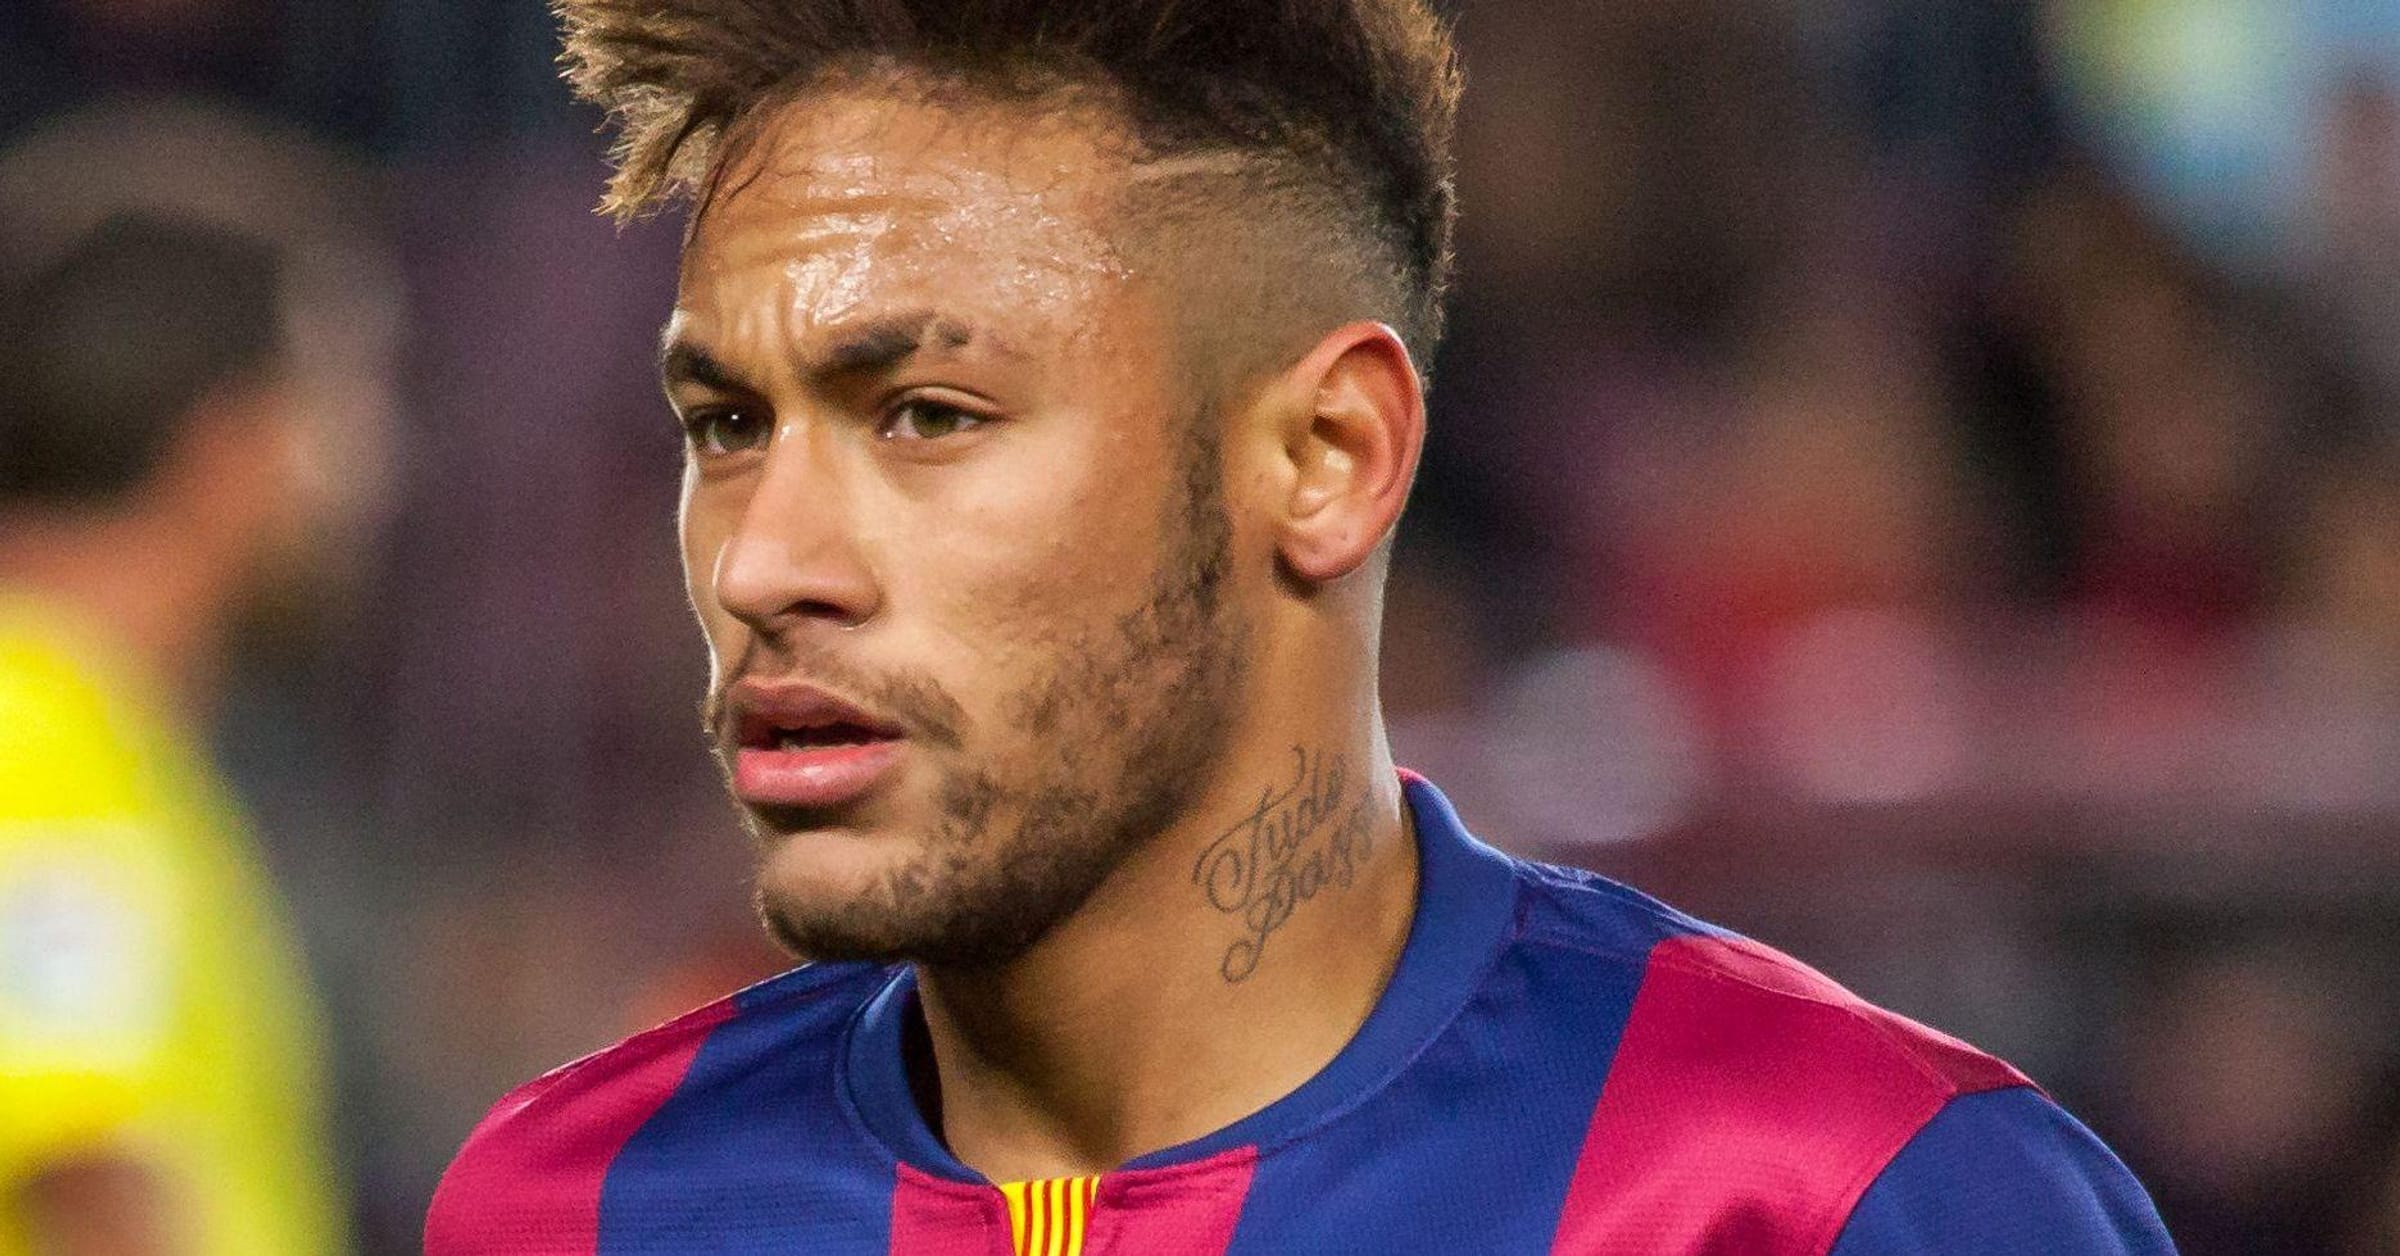 Neymar Flew to Paris to Hook up with Hollywood Star Chloë Grace Moretz